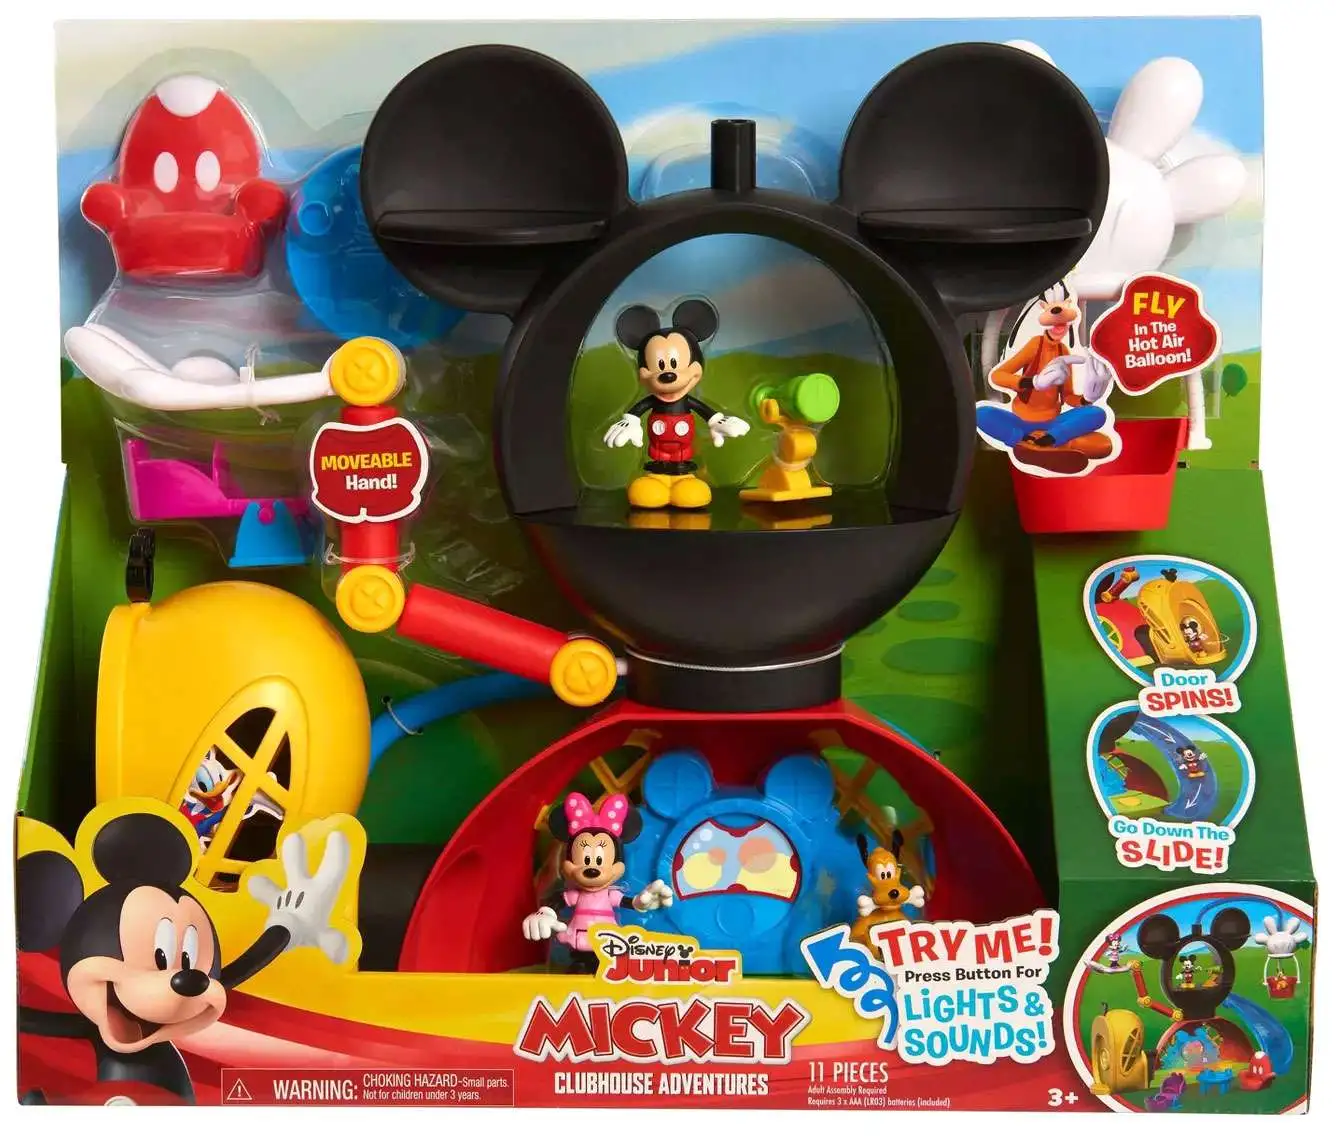 Playhouse Disney: Mickey Mouse Clubhouse: Mickey's Adventures in